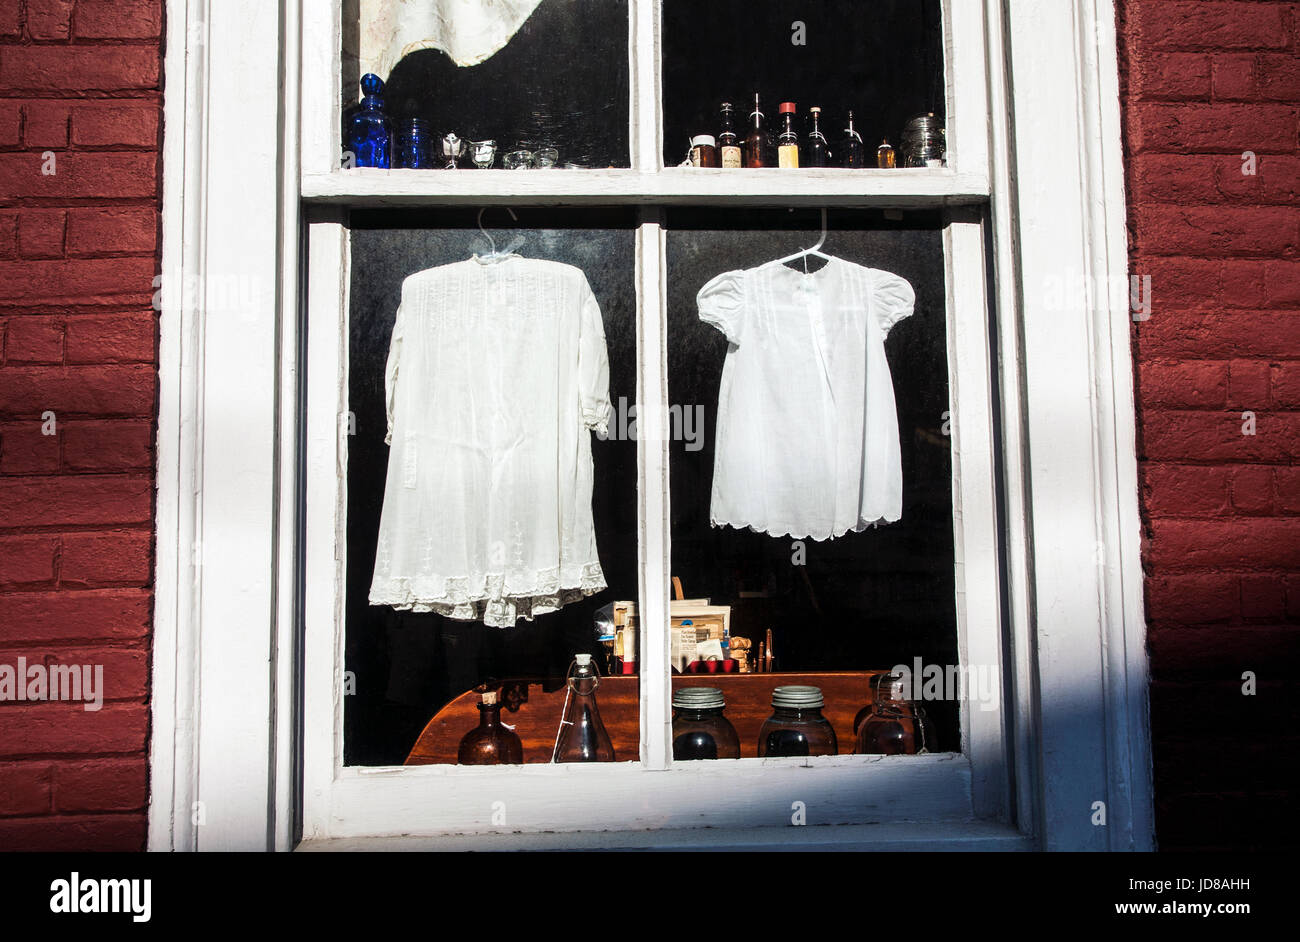 Vintage laundry white baby dresses in an antique store window, Lancaster County, Strasbourg, Pennsylvania, USA, PA historic clothing antique images Stock Photo